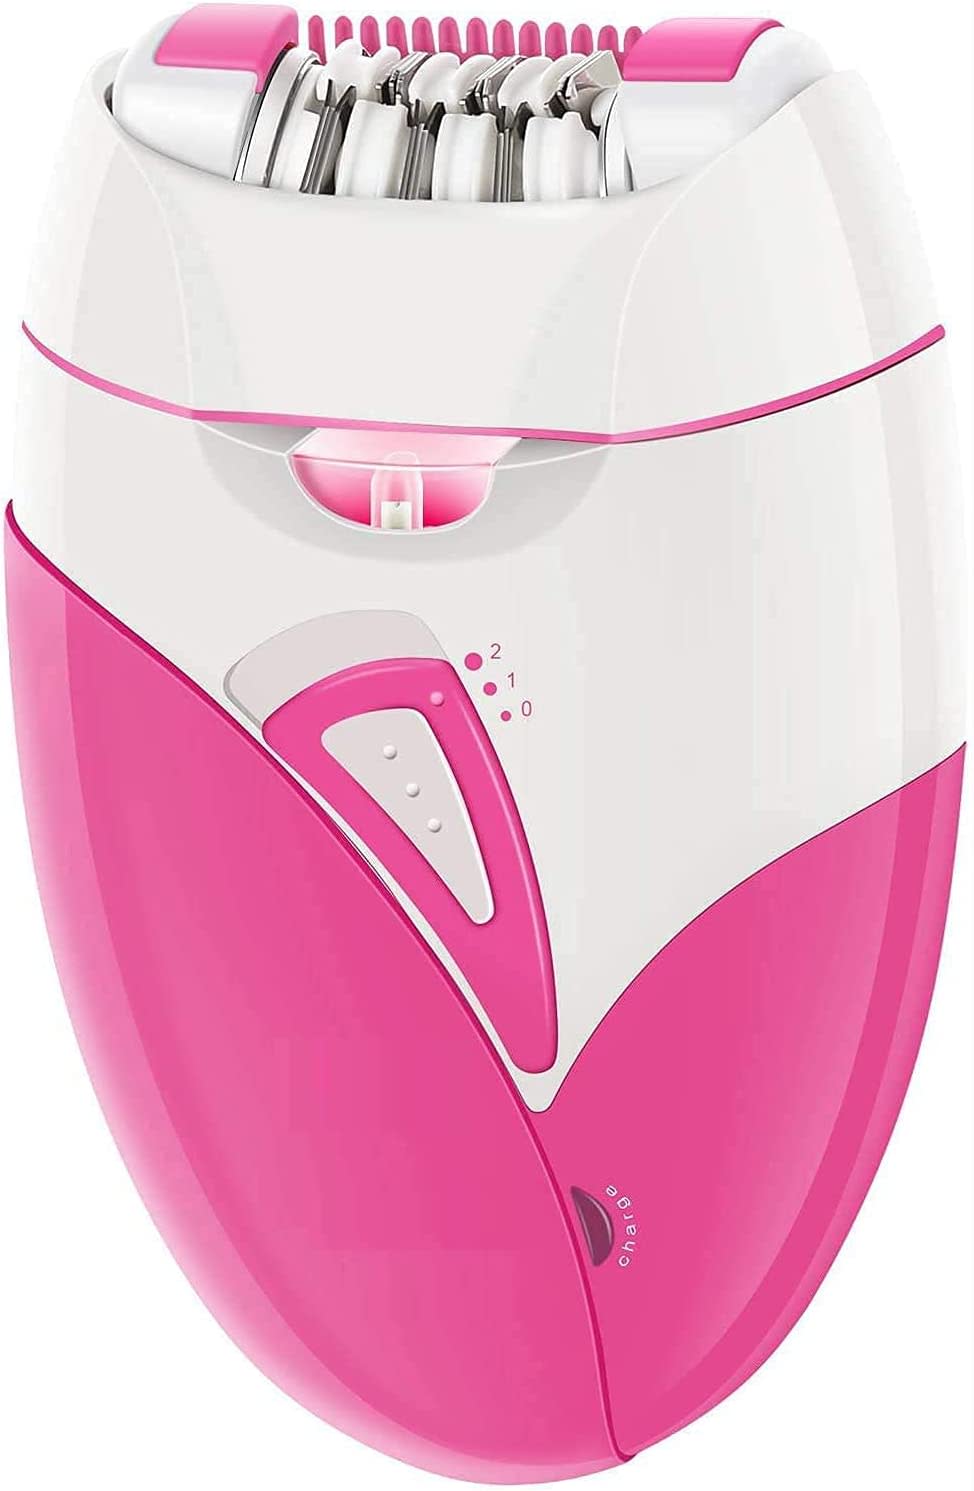 Kyowoll Electric Hair Epilator Removal for Women with LED Light